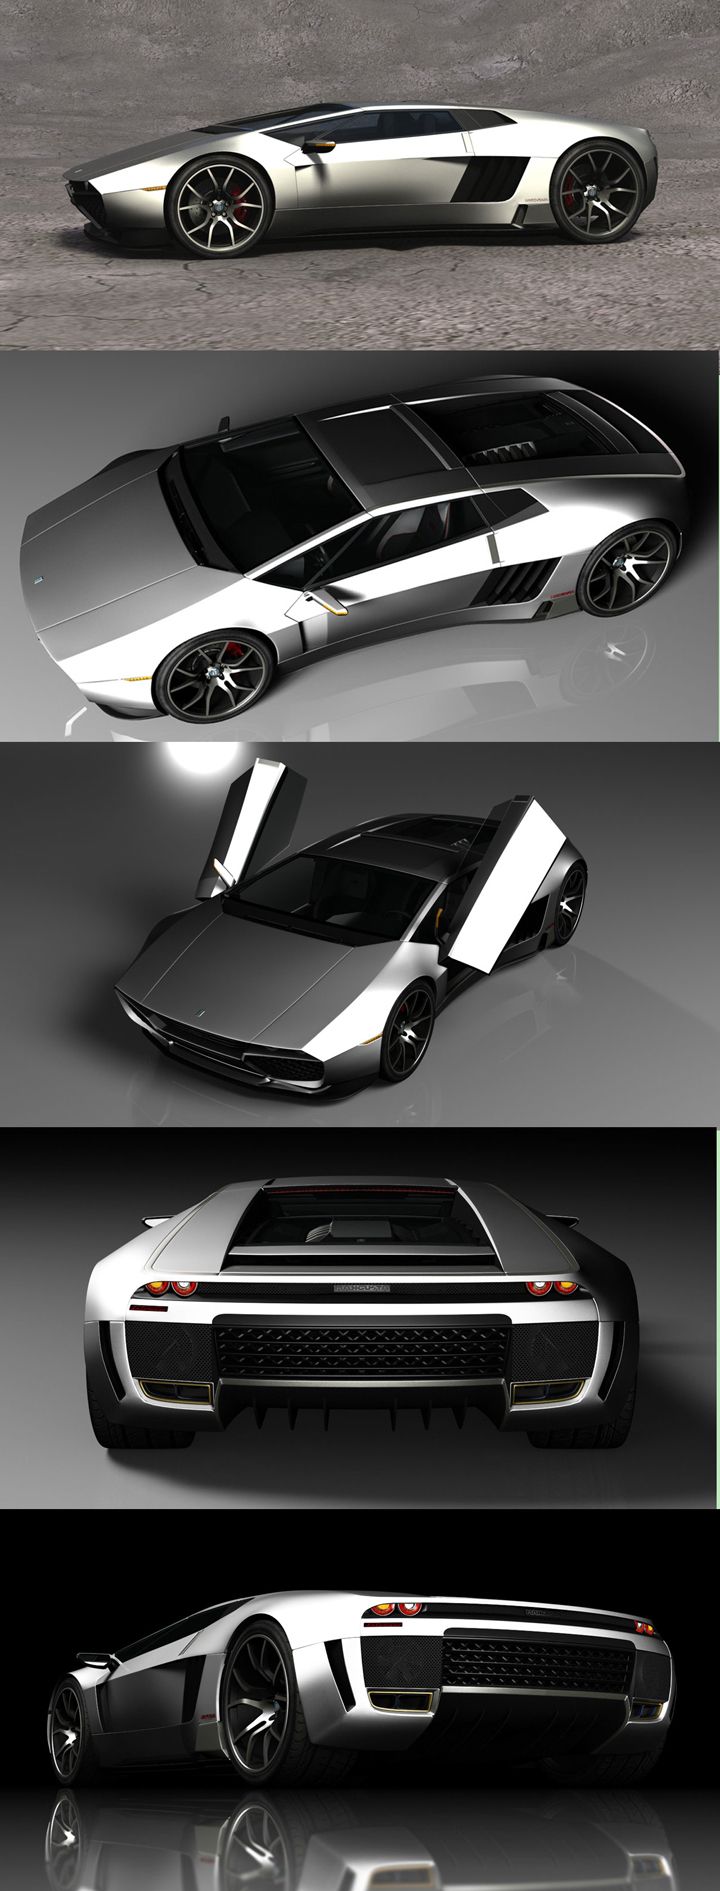 ♂ The Mangusta Legacy concept is a reincarnation of the classic De Tomaso Mang…